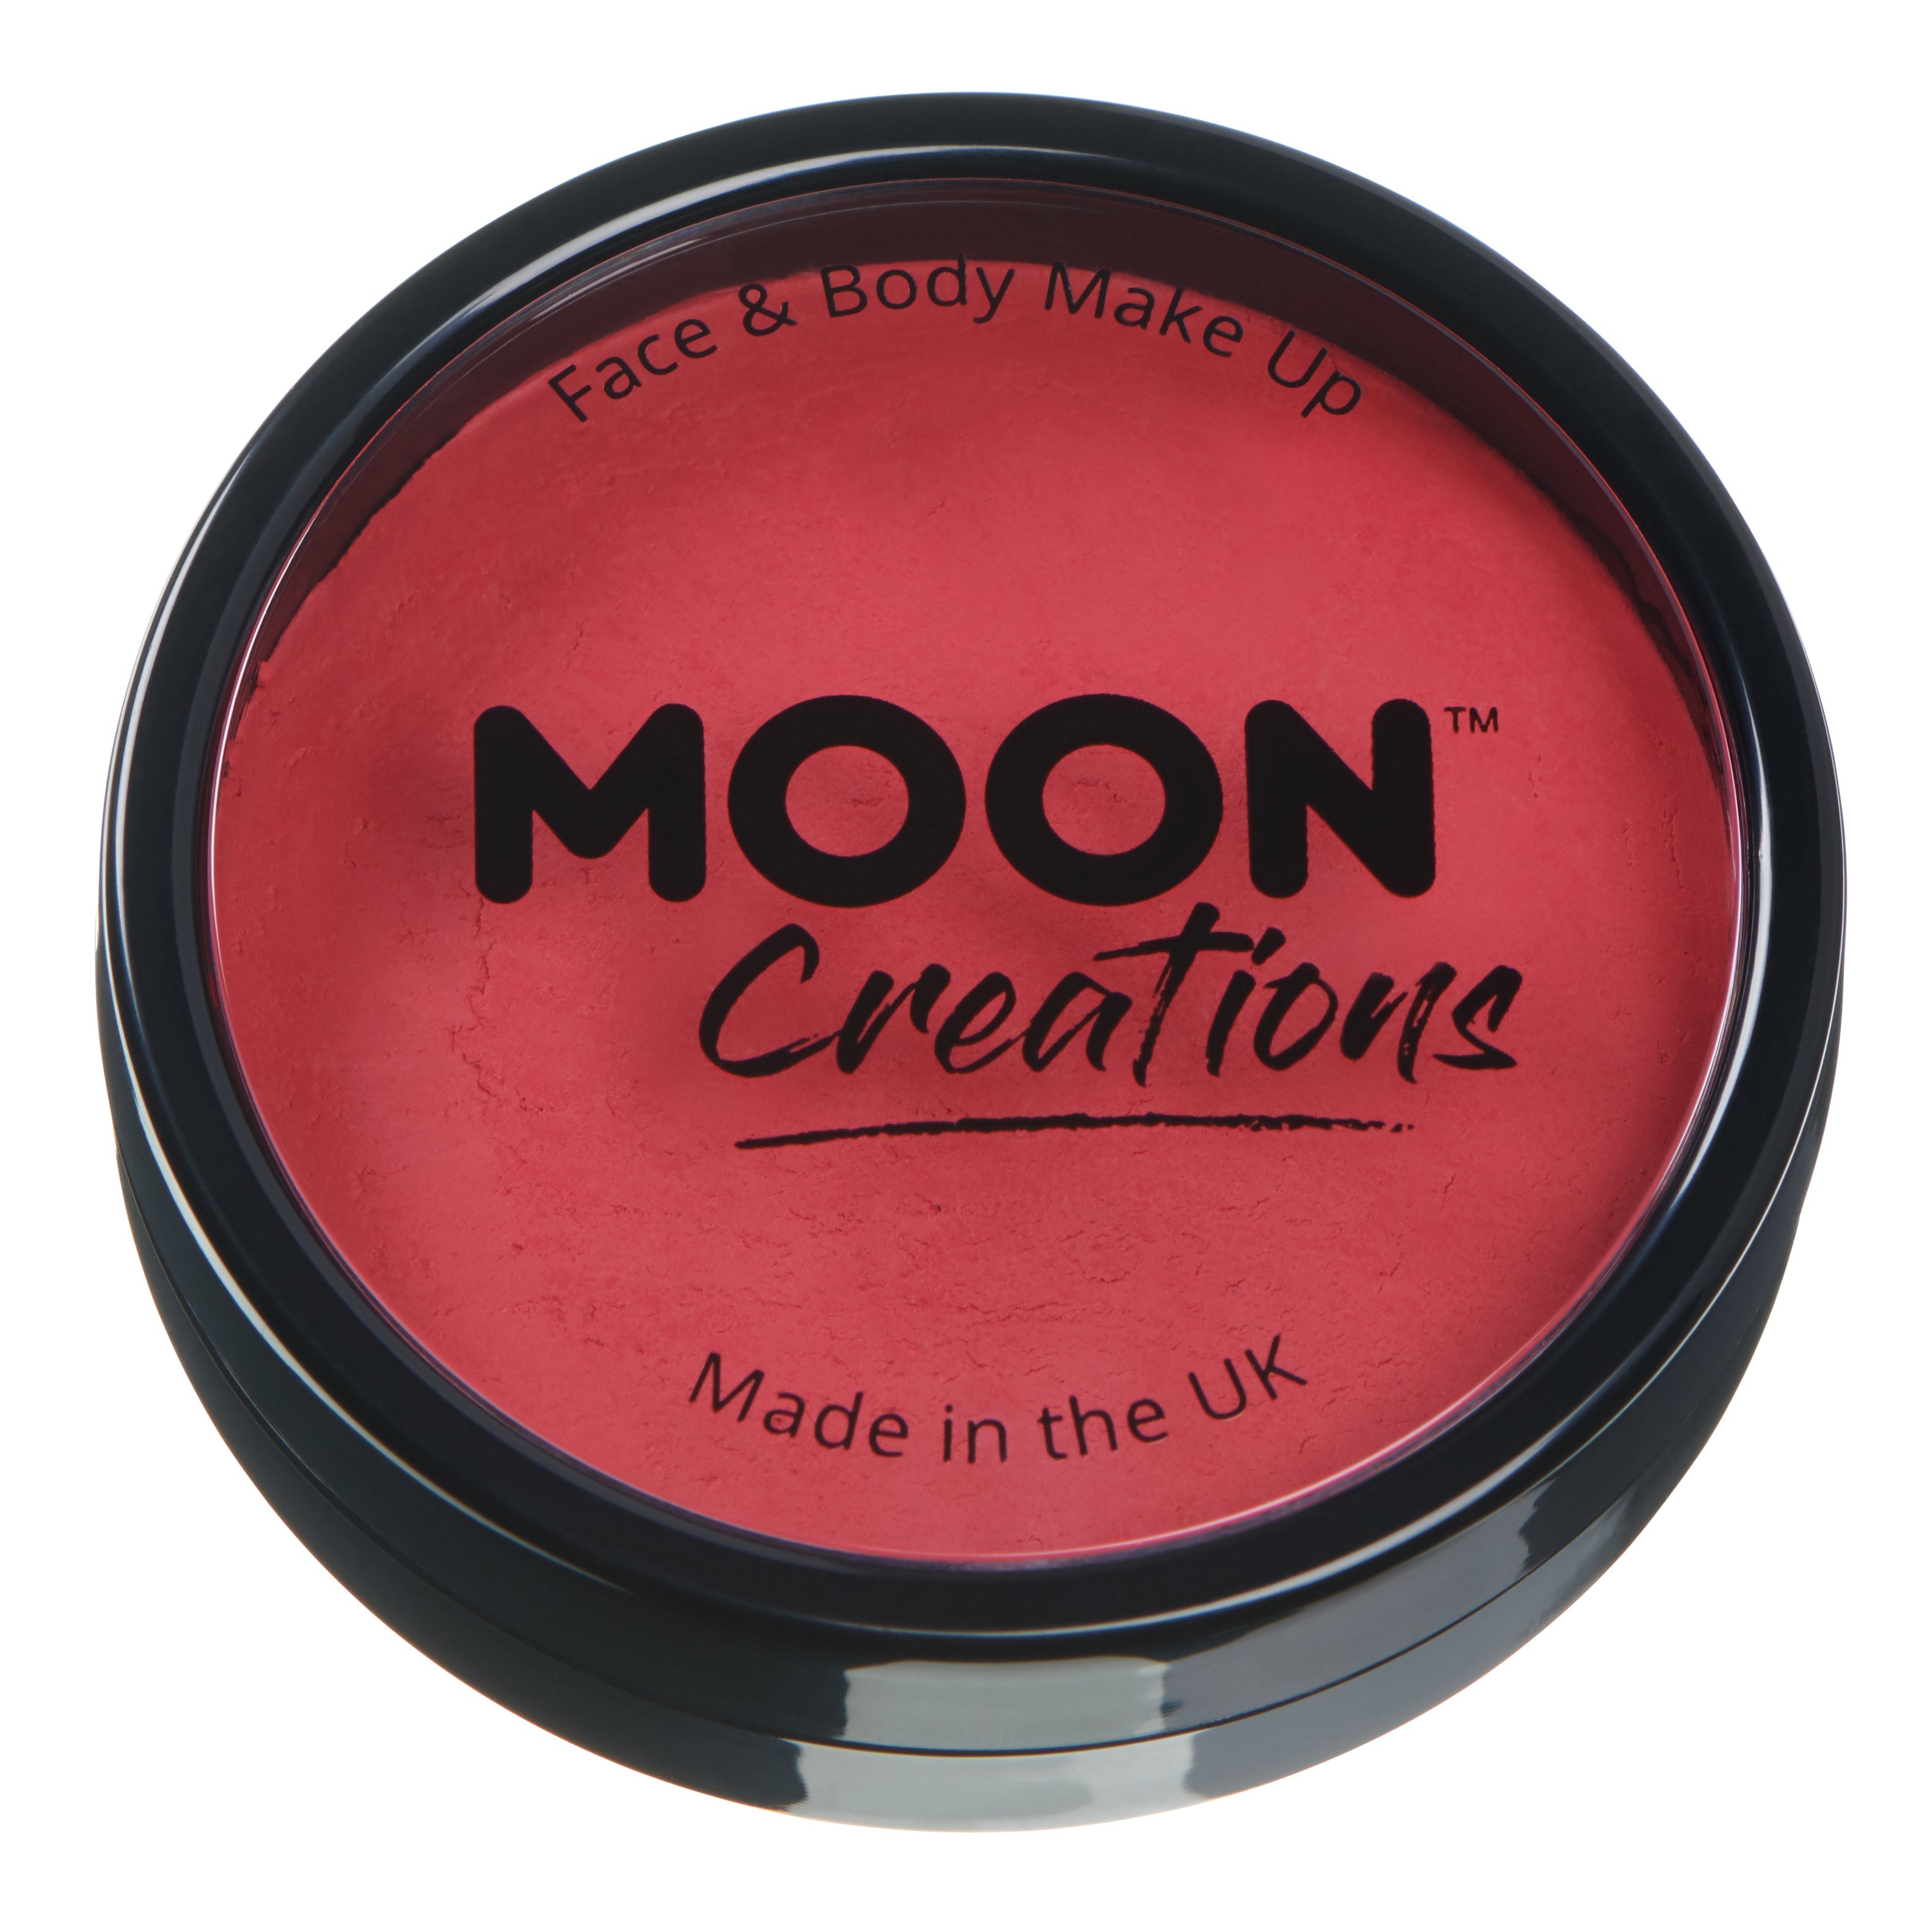 Magenta - Pro Professional Face Paint, 36g. Cosmetically certified, FDA & Health Canada compliant, cruelty free and vegan.